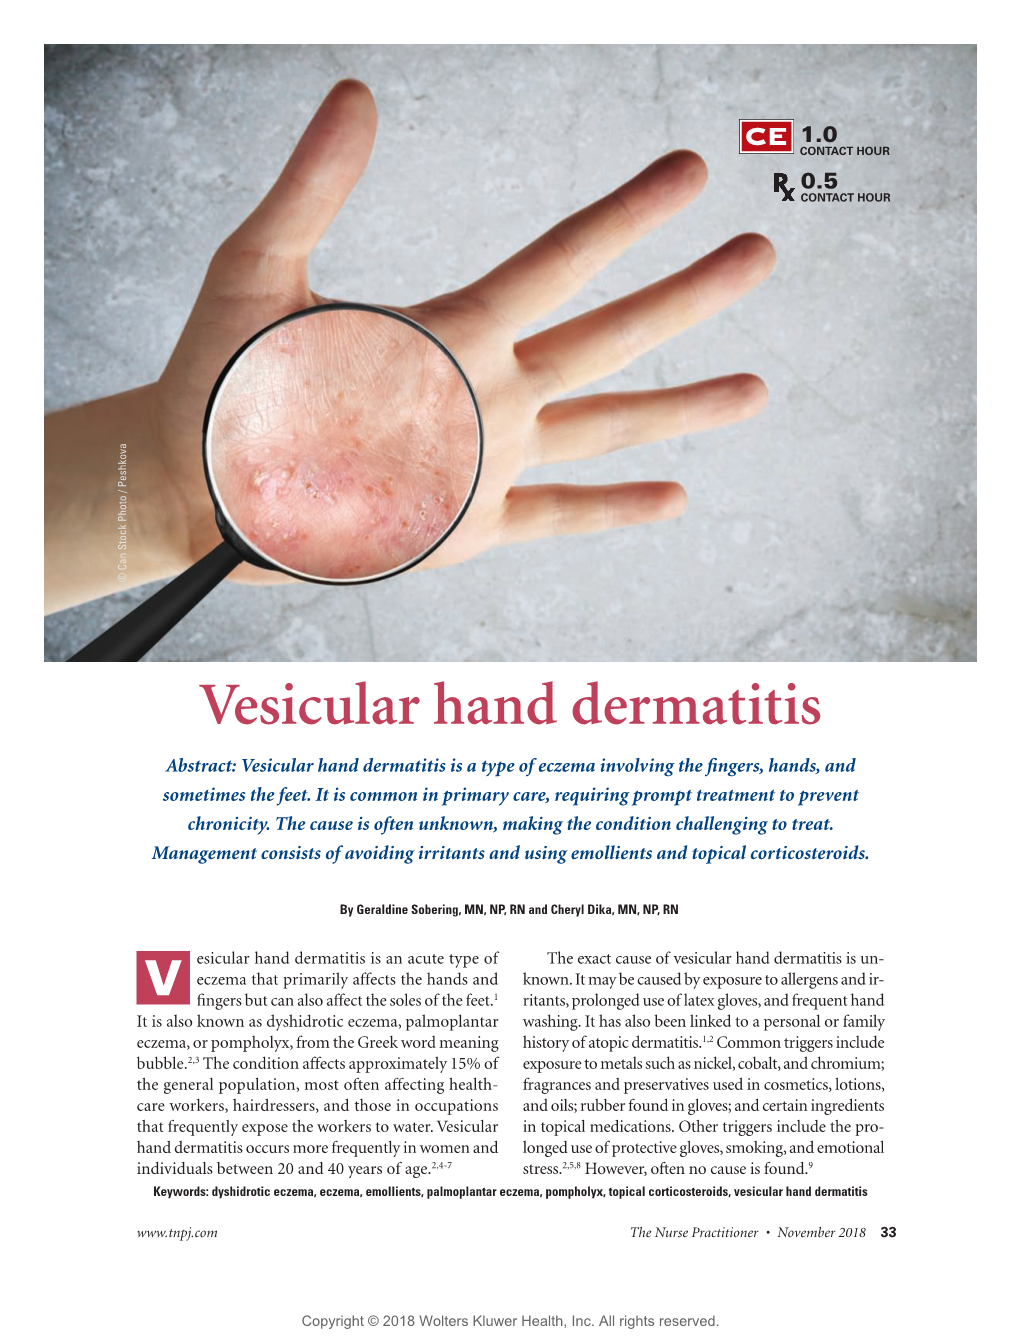 Vesicular Hand Dermatitis Abstract: Vesicular Hand Dermatitis Is a Type of Eczema Involving the ﬁ Ngers, Hands, and Sometimes the Feet